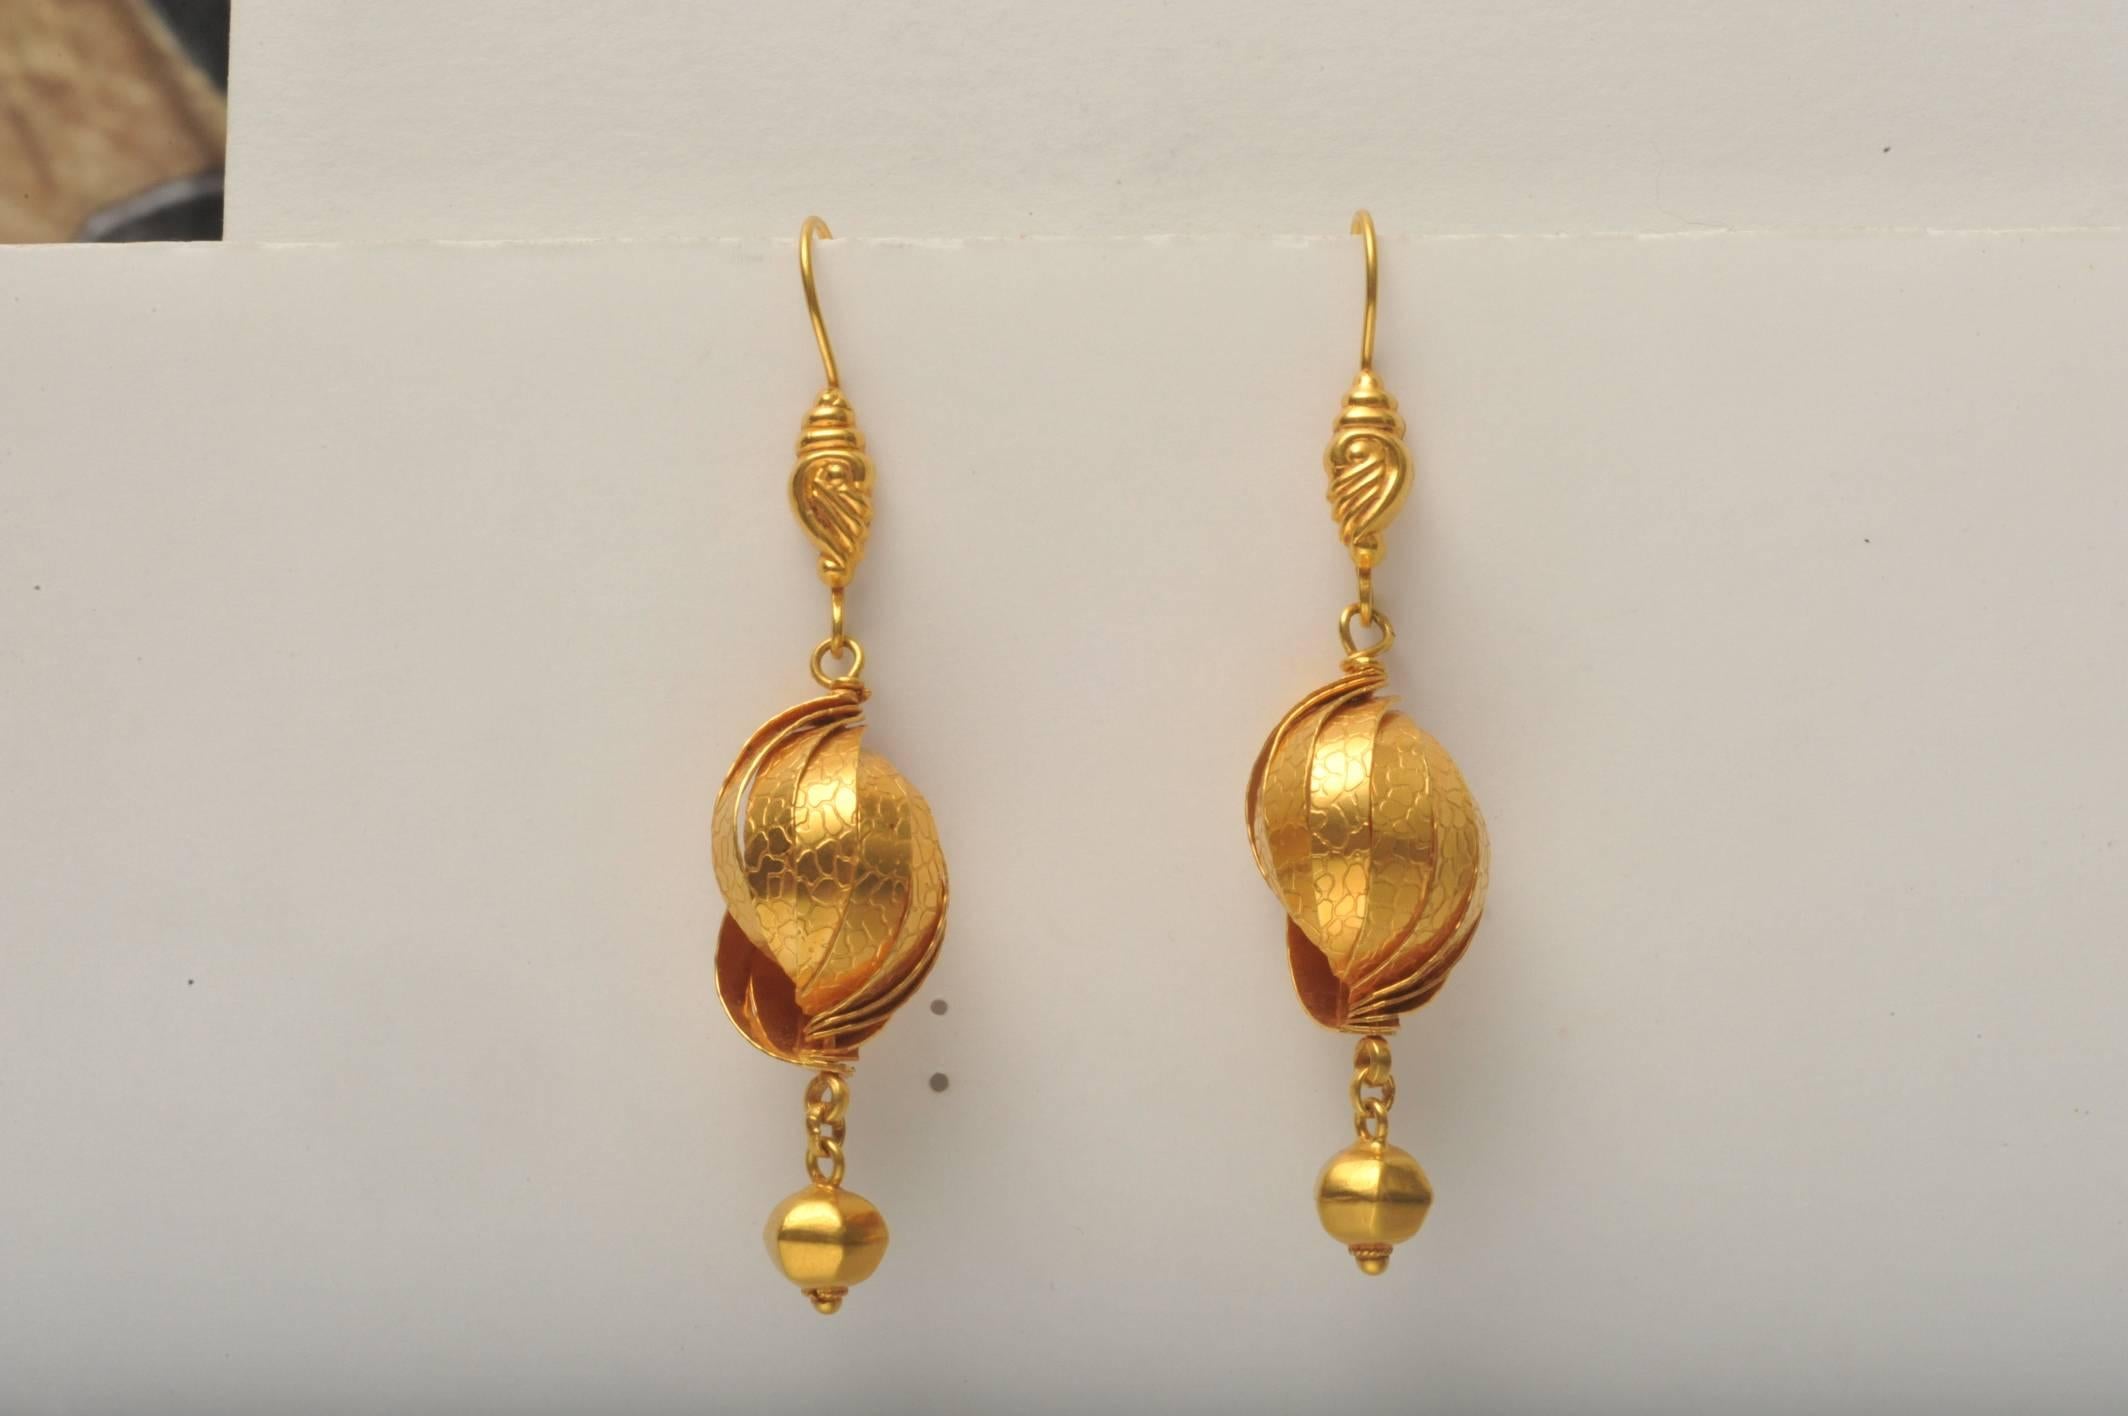 Pair of 22K gold art deco dangle earrings with hand-tooled textured workmanship.  On a french wire for pierced ears.  Fine details and craftsmanship.